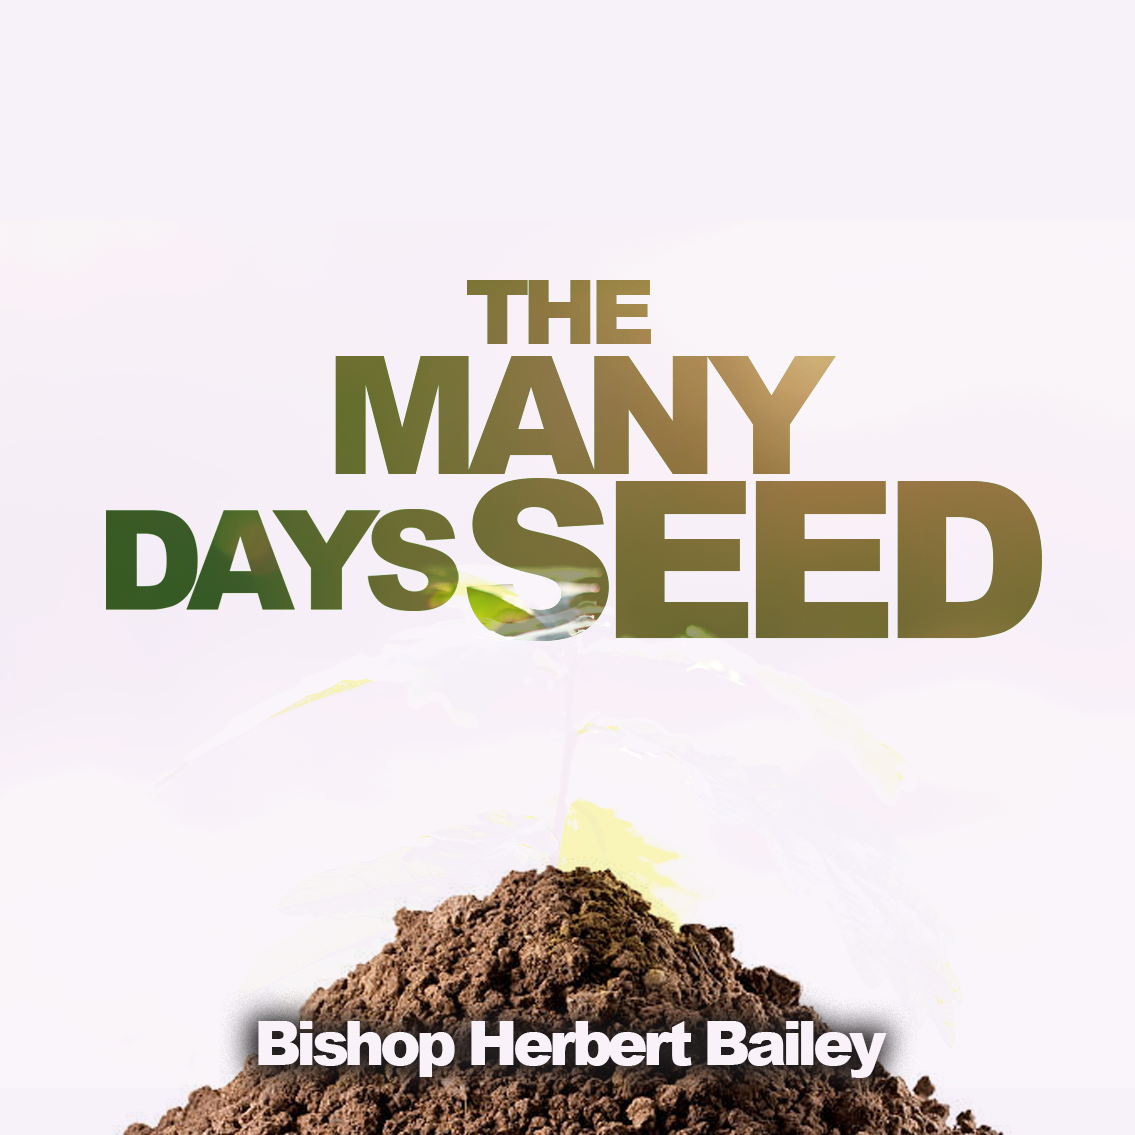 The Many Days Seed